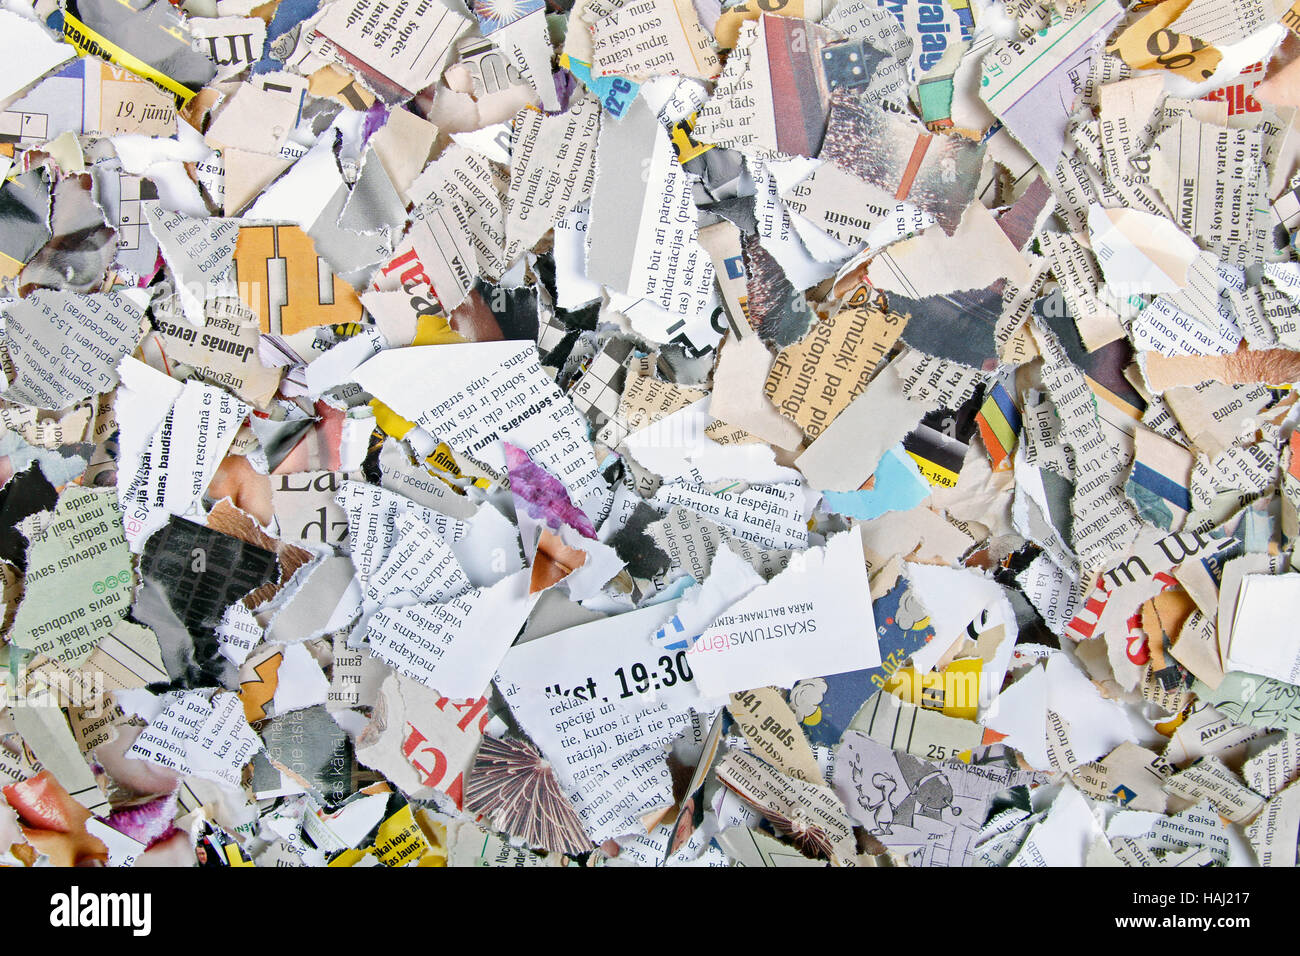 background with different torn newspapers and magazines Stock Photo